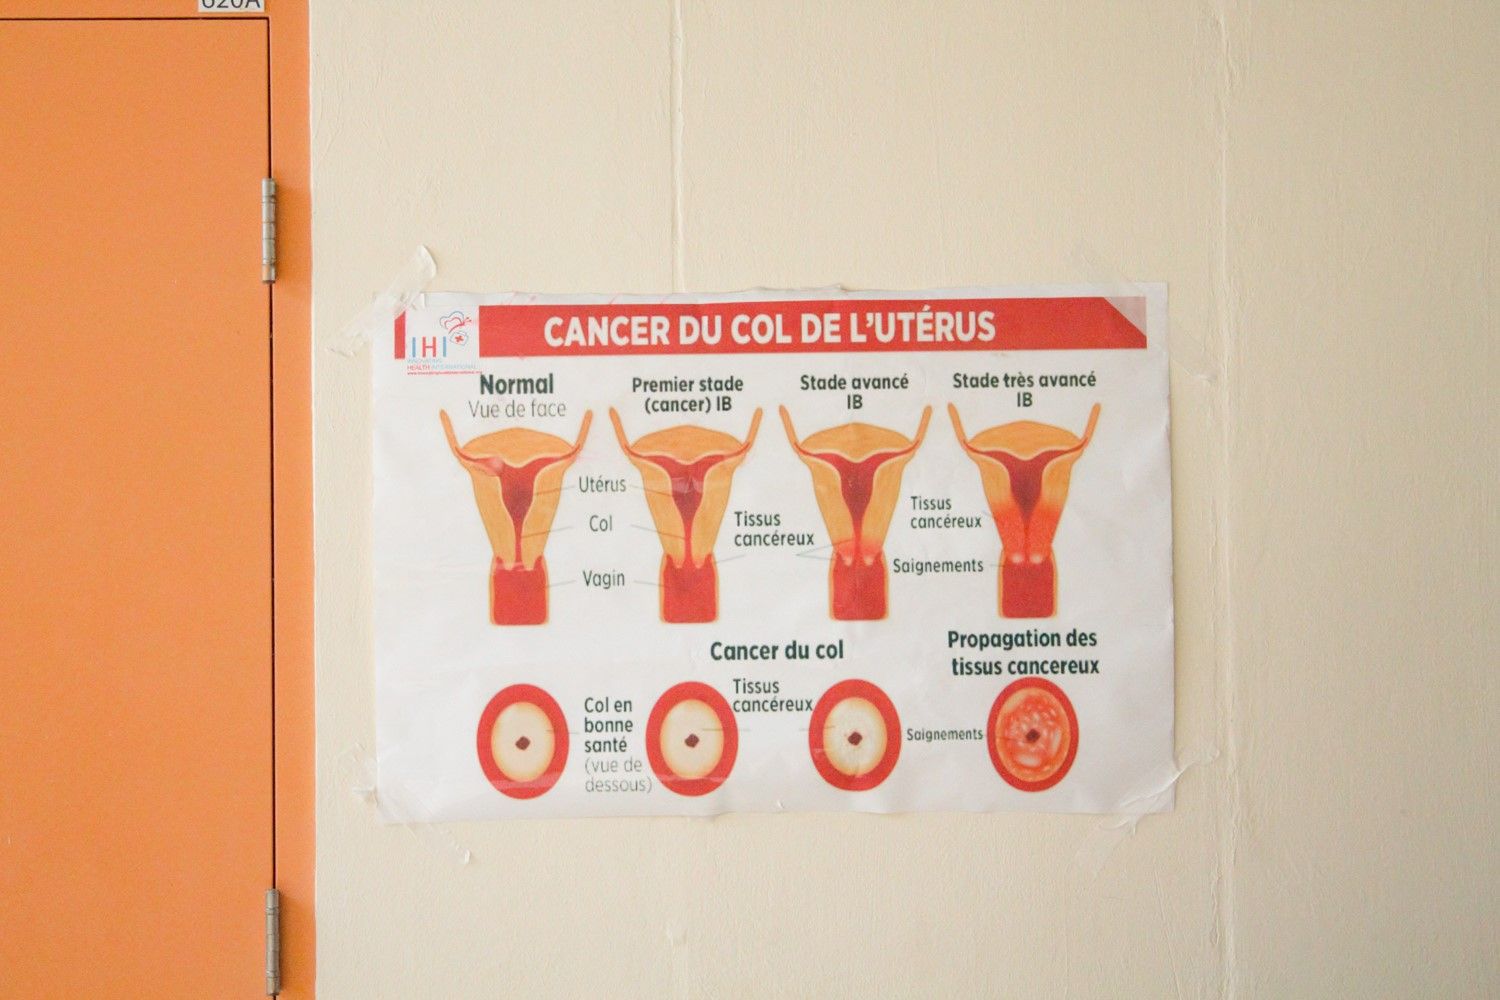 The screening program is held once a month at La Providence. In addition to the screenings, a health educator informs the women about the signs and symptoms of breast and cervical cancer. Some women hear about the program through community health workers, others from their doctors. Women who have been previously screened and tested positive also come to receive cryotherapy treatment. Like many women at the clinic, Lemour came today because the screening was free and she knew if she tested positive, she could get the treatment the same day. Image by Anna Russell. Haiti, 2017.